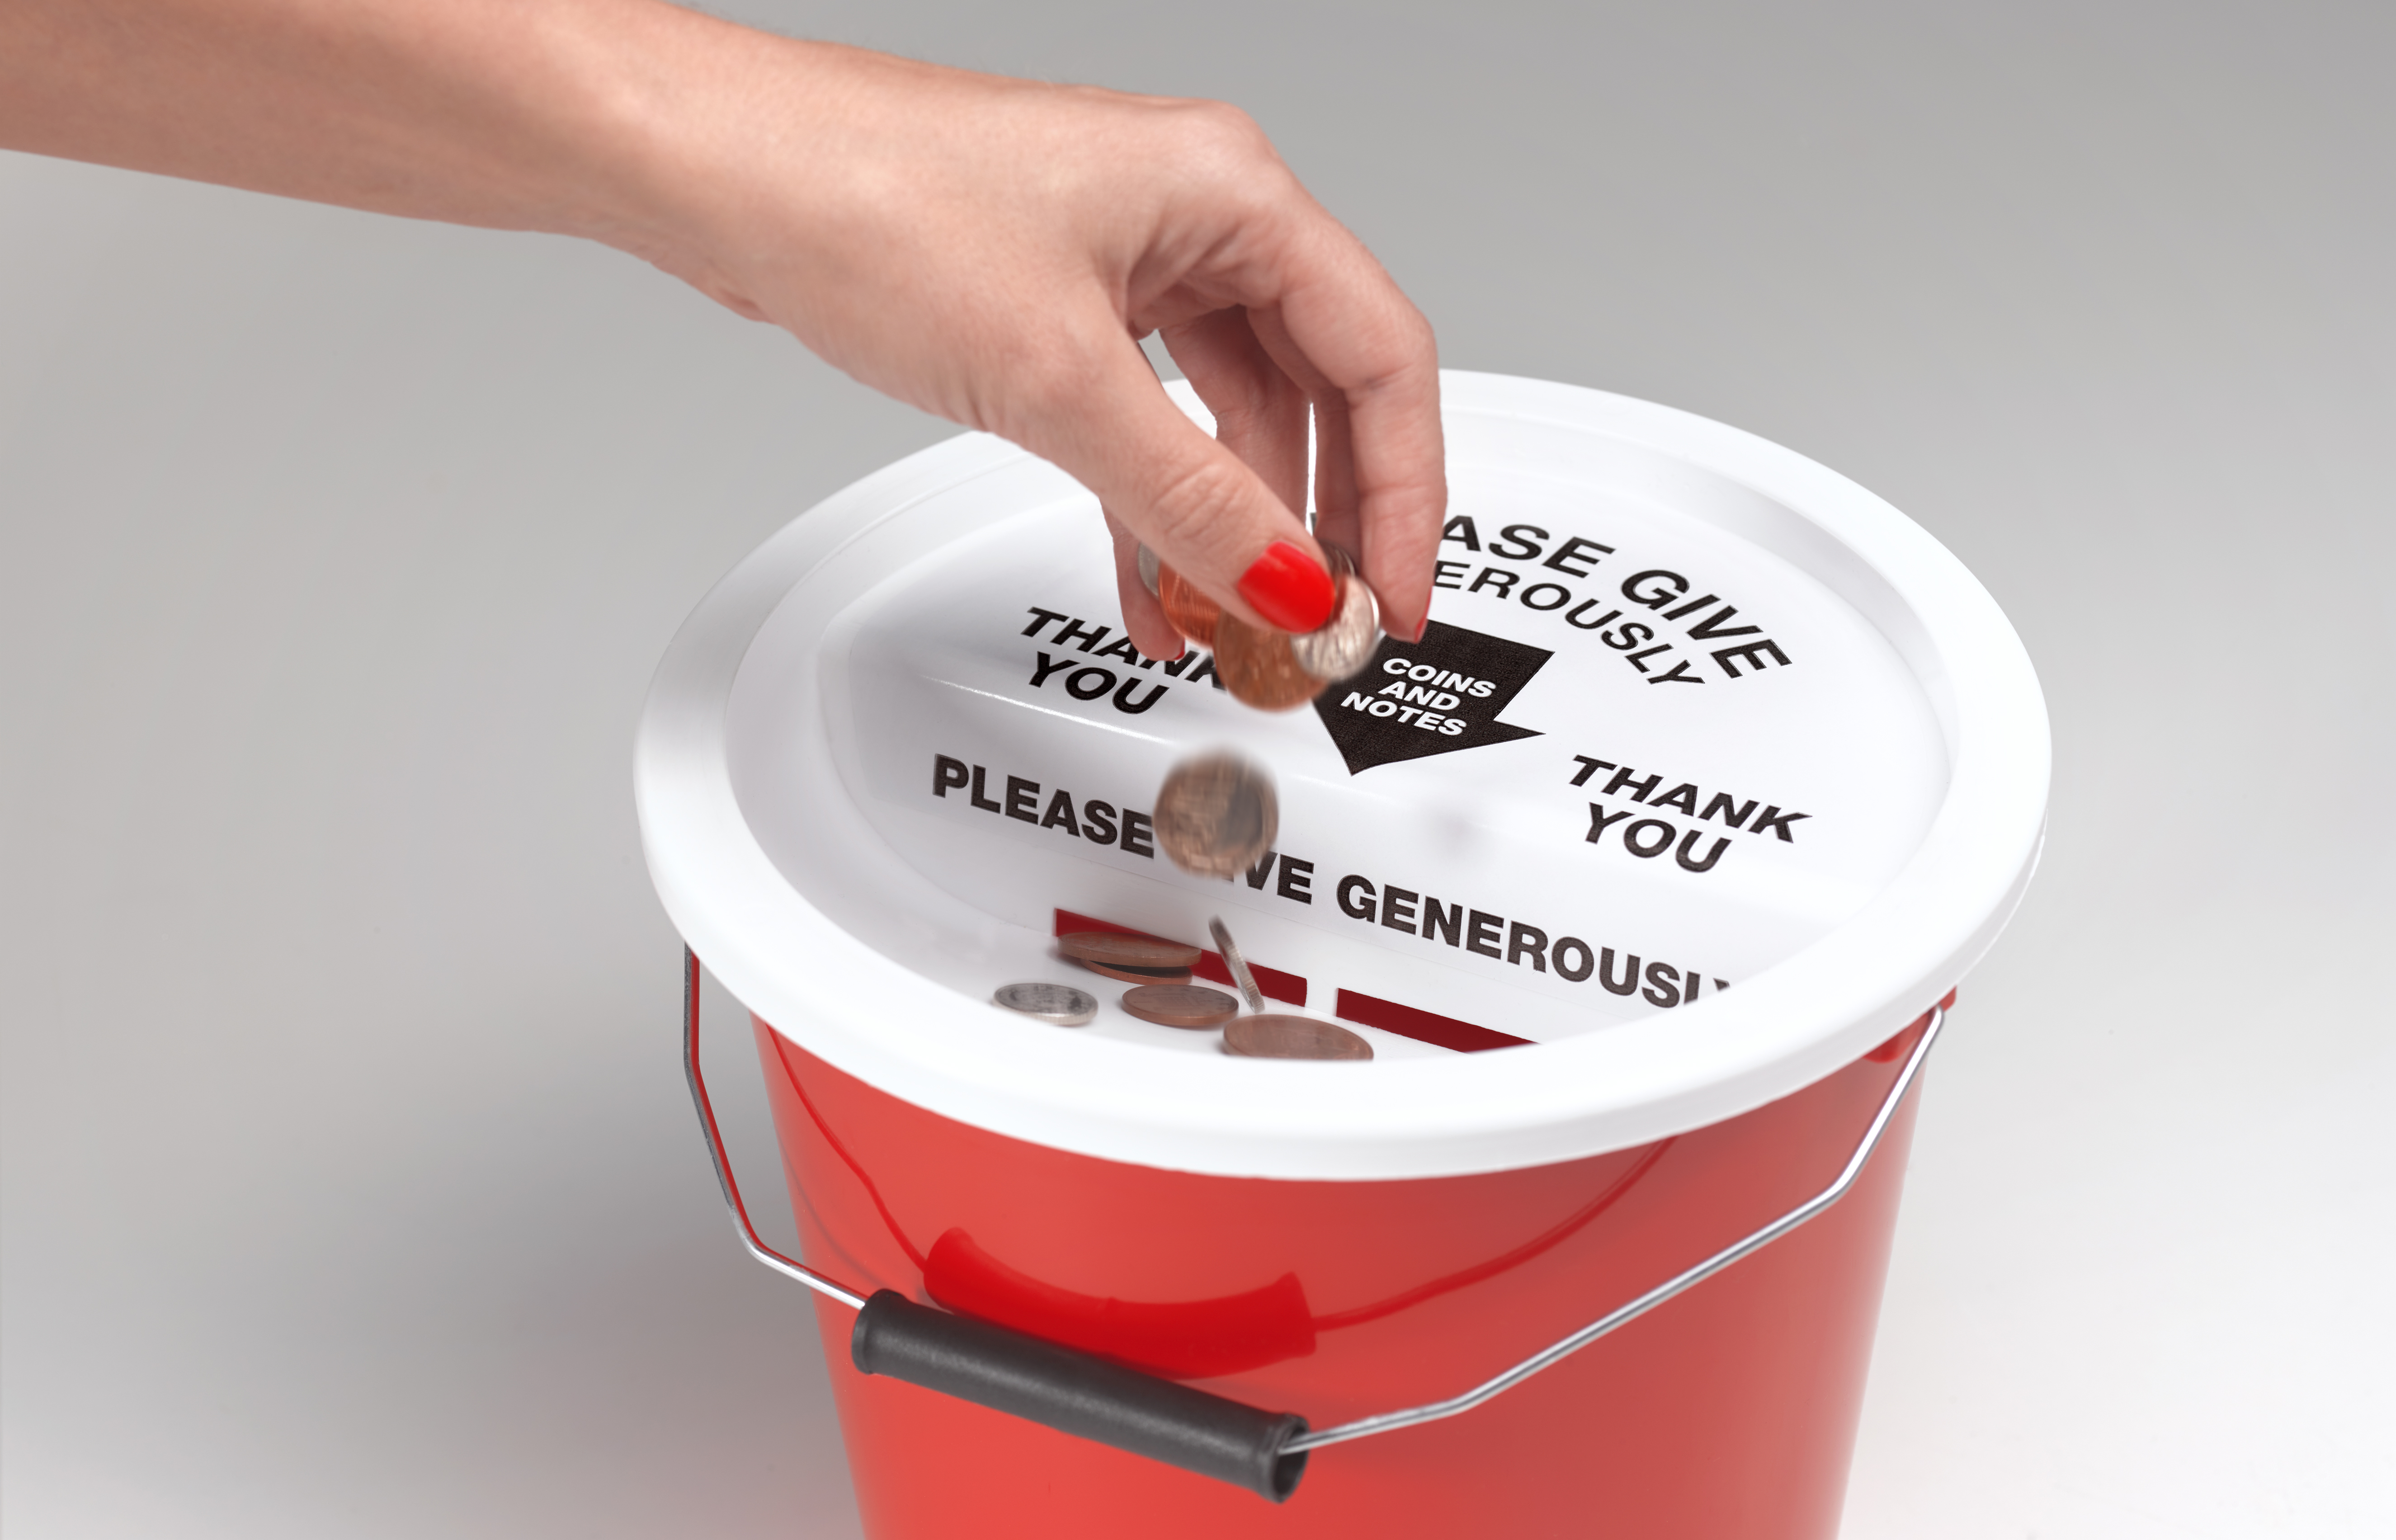 Coins being donated in charity bucket